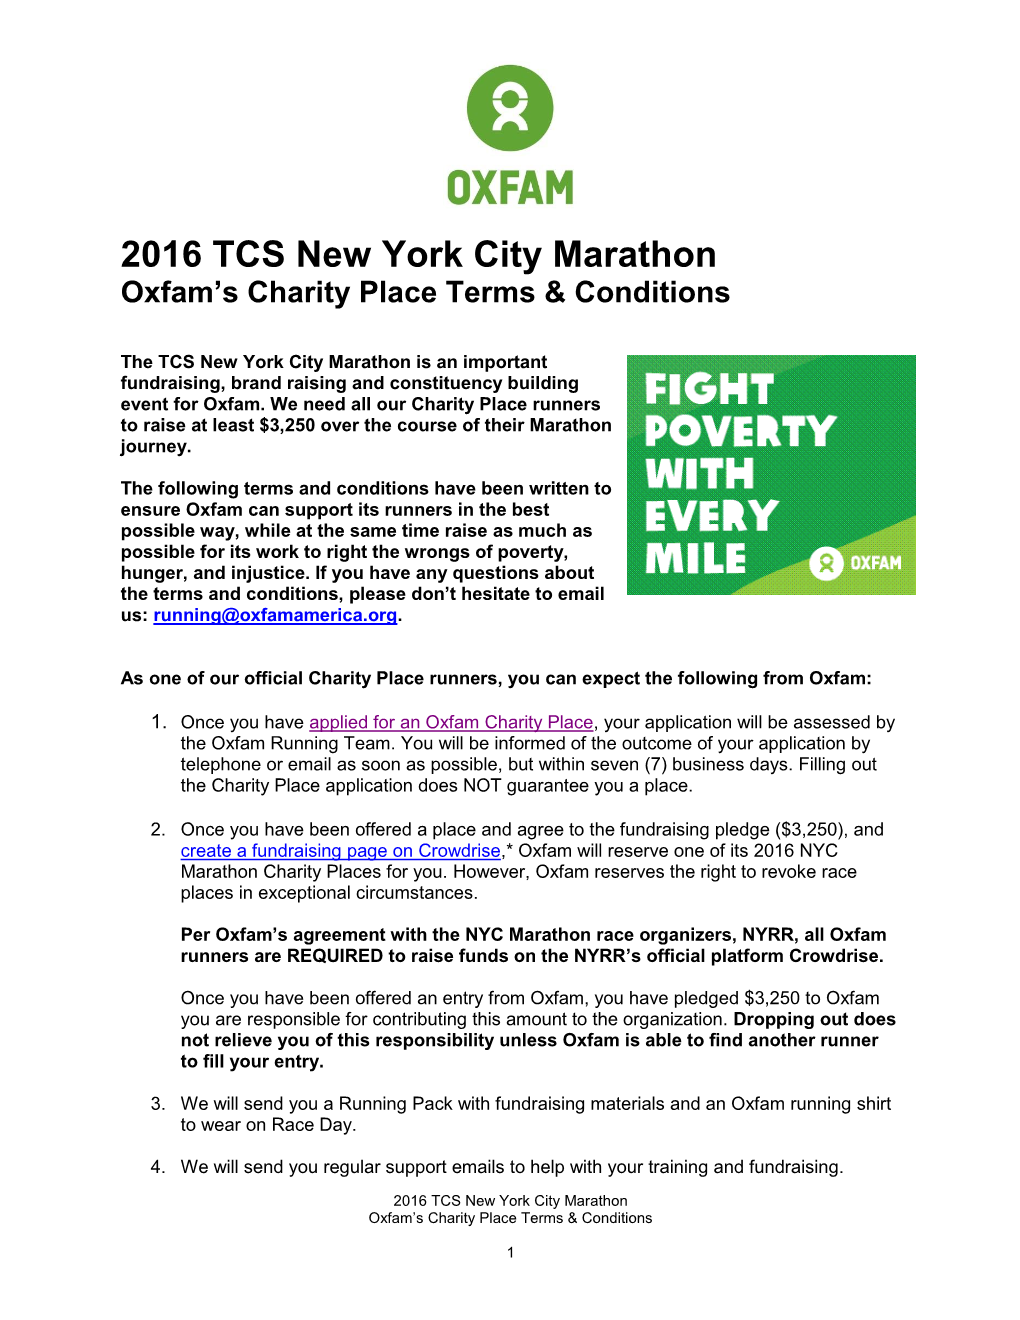 2016 TCS New York City Marathon Oxfam’S Charity Place Terms & Conditions